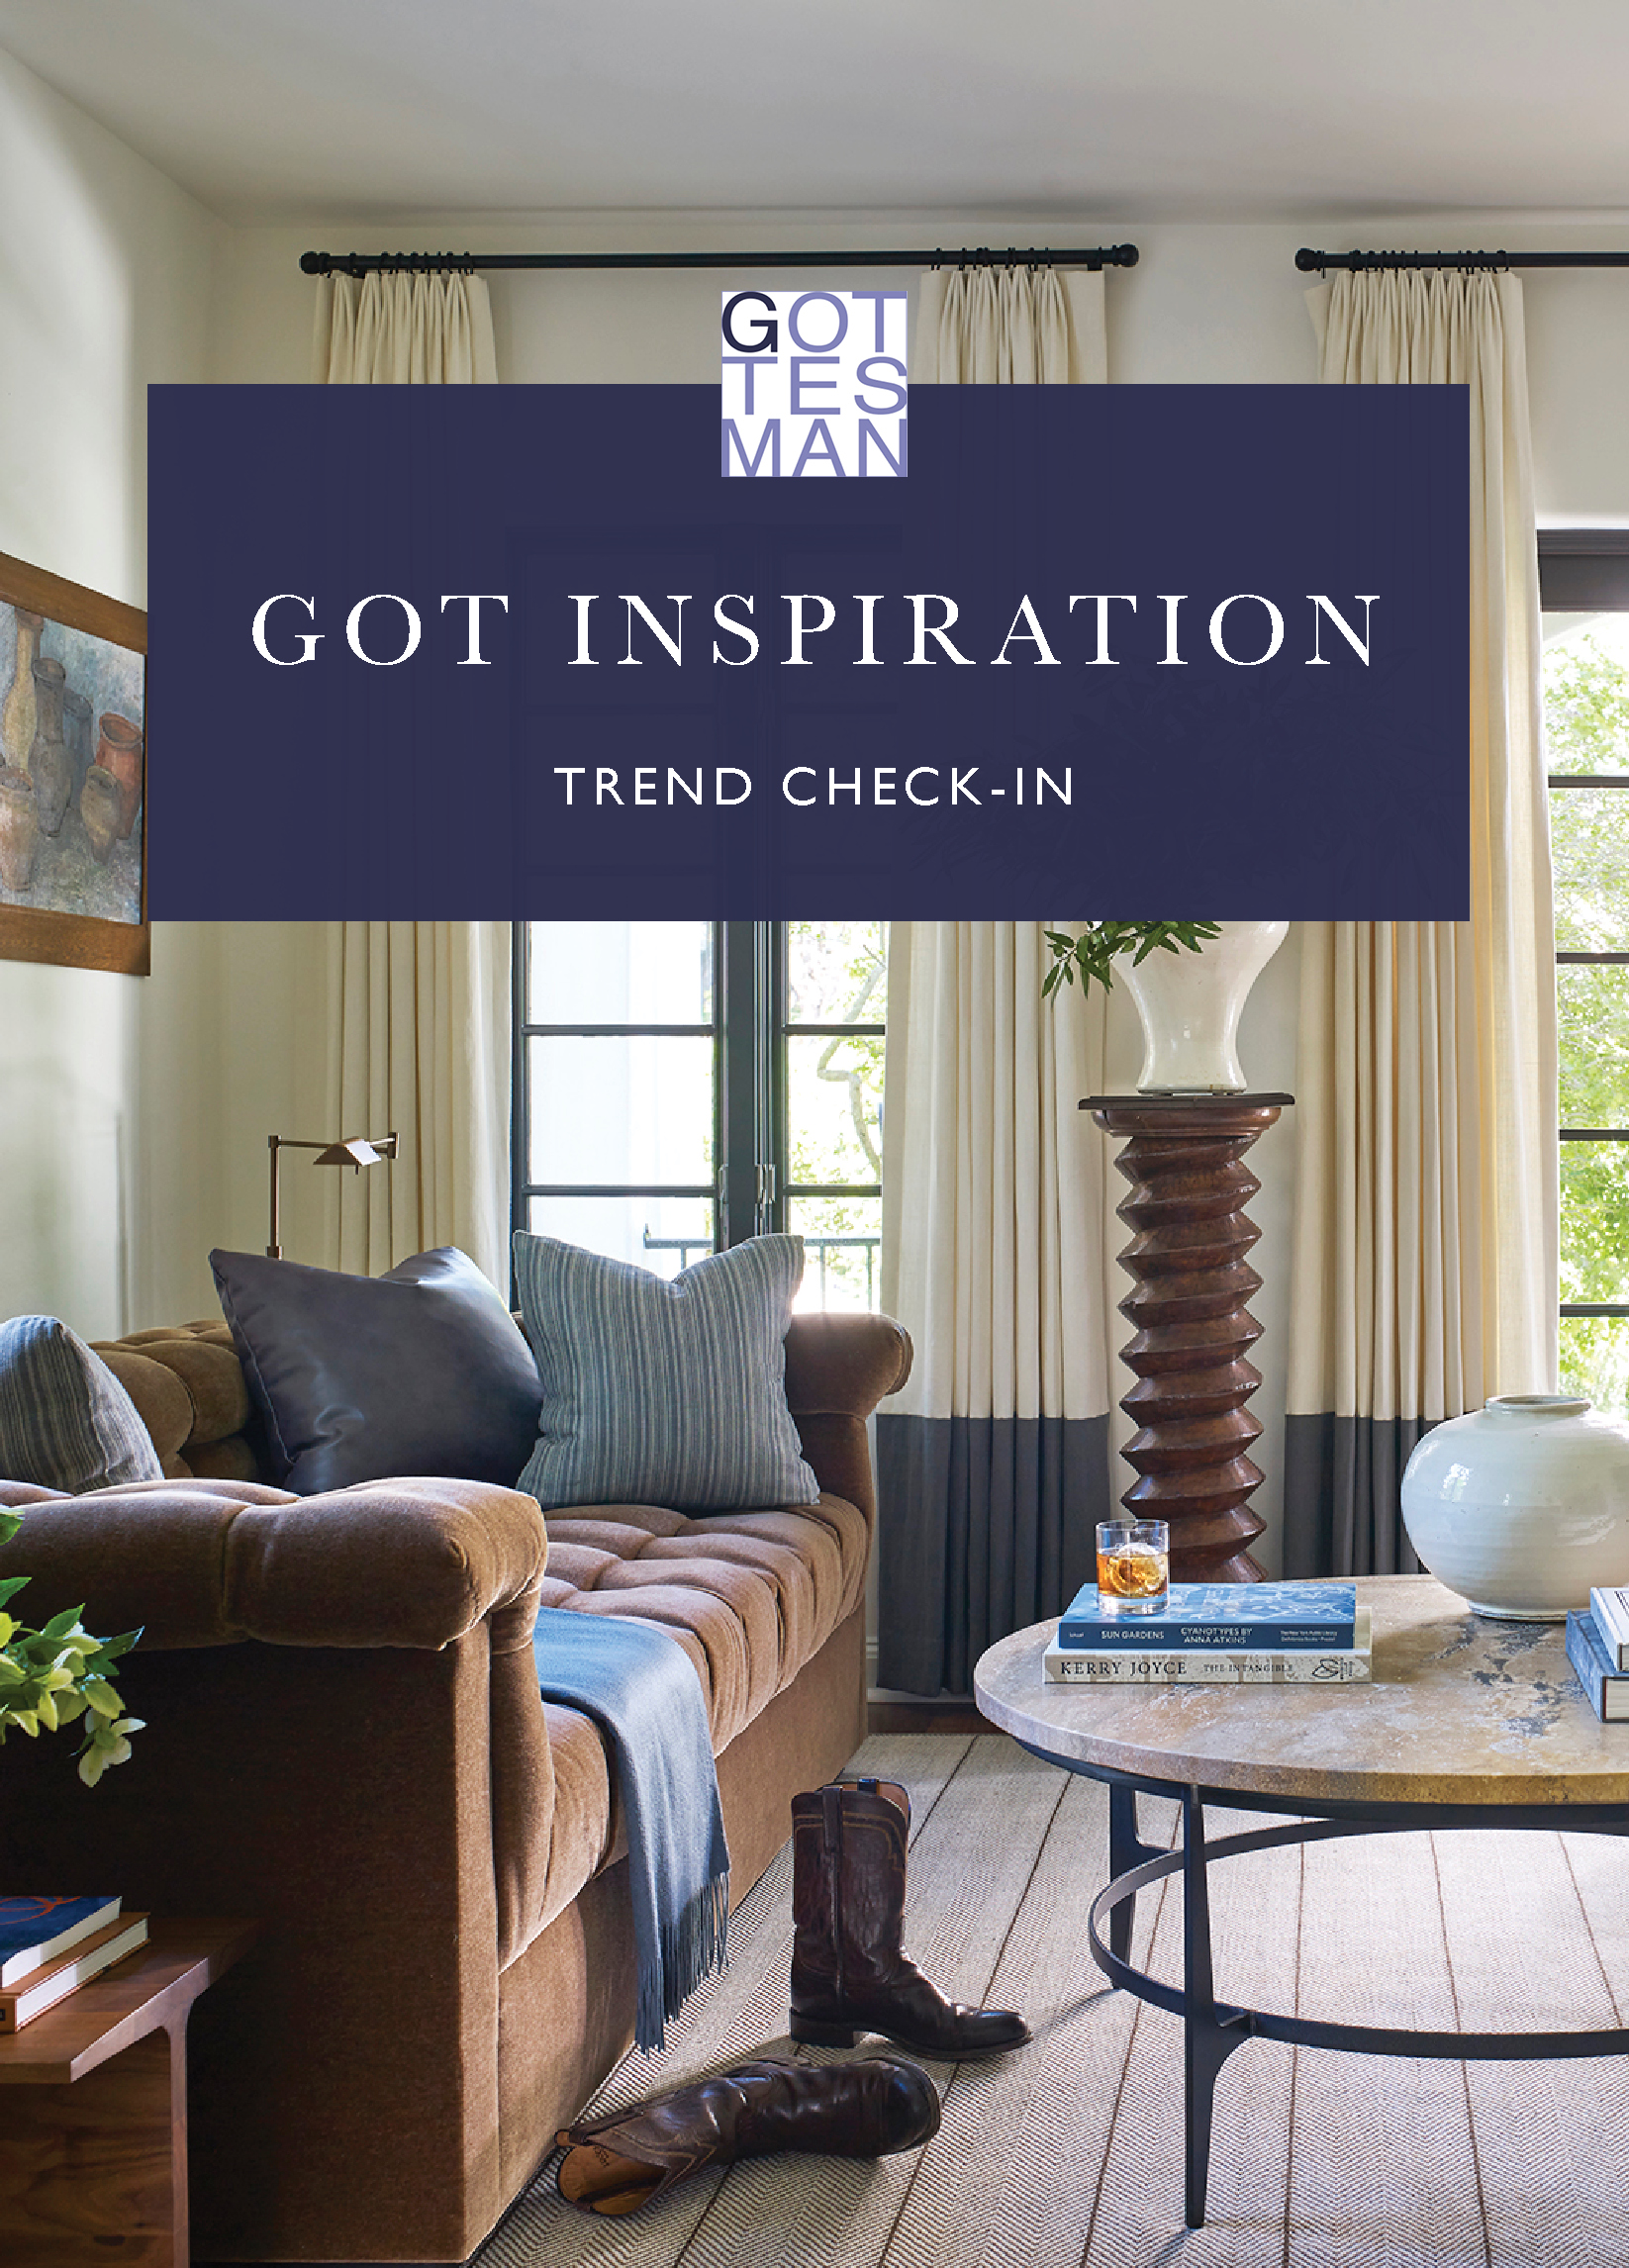 "Got Inspiration: Trend Check-In"